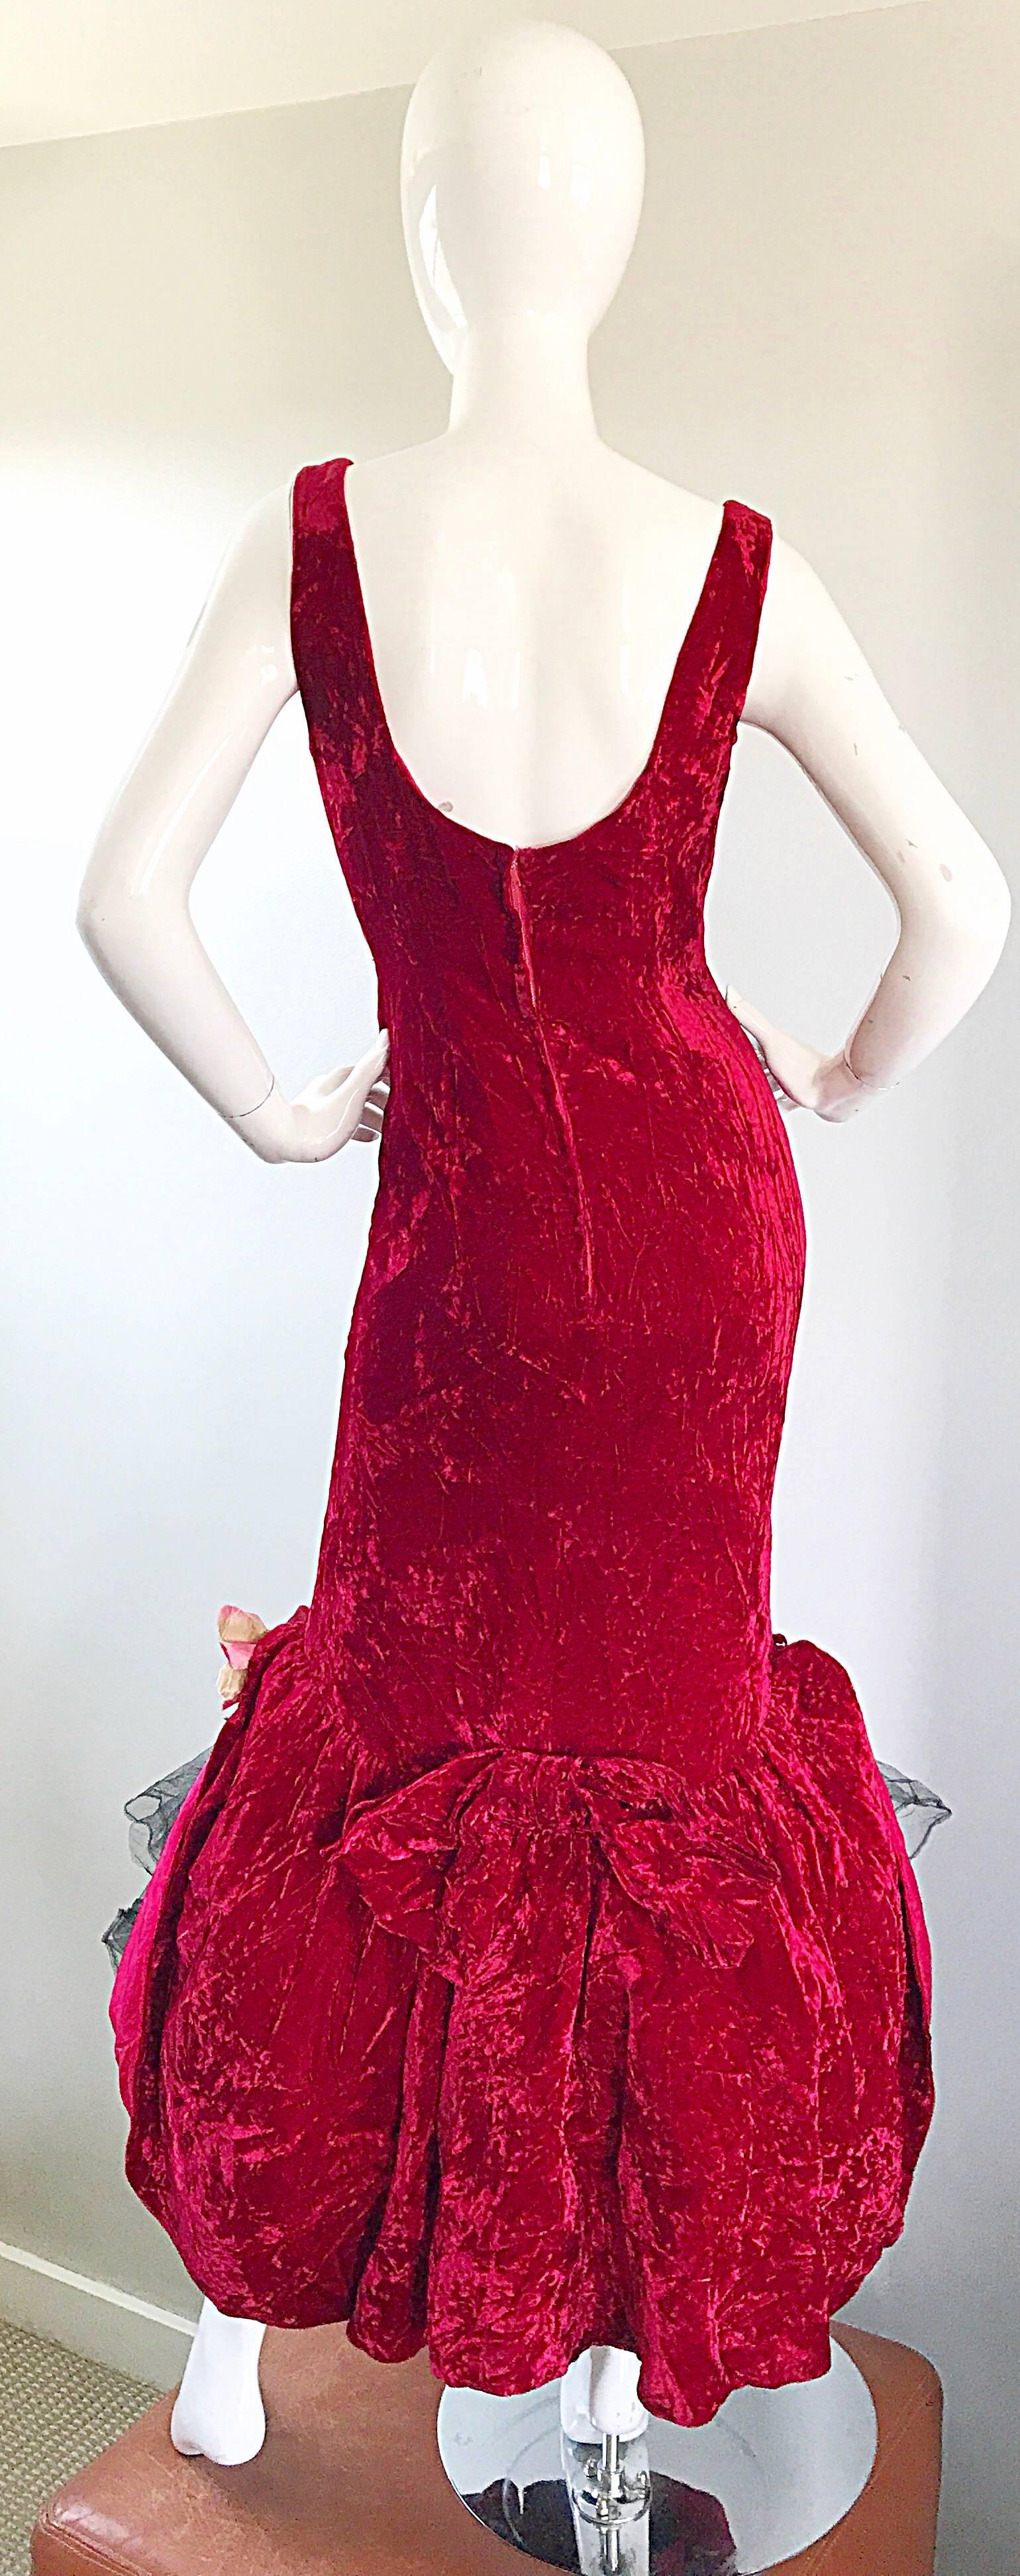 Sensational 1950s Demi Couture Crimson Red Crushed Velvet Vintage Mermaid Gown In Excellent Condition For Sale In San Diego, CA